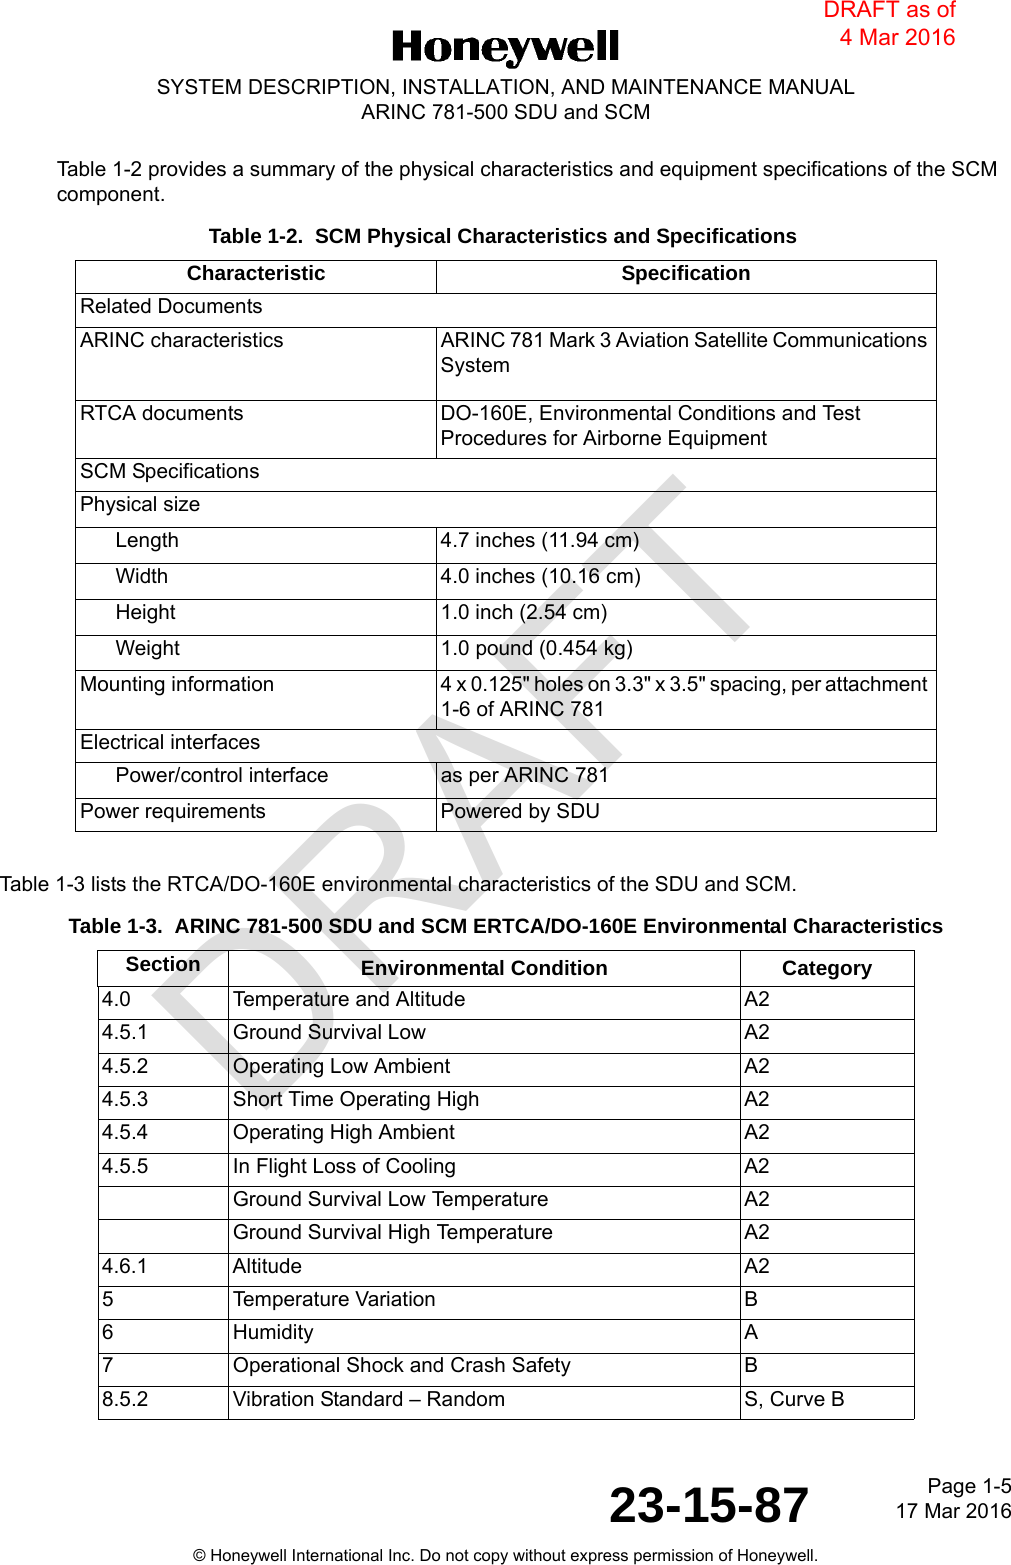 DRAFTPage 1-517 Mar 201623-15-87SYSTEM DESCRIPTION, INSTALLATION, AND MAINTENANCE MANUALARINC 781-500 SDU and SCM© Honeywell International Inc. Do not copy without express permission of Honeywell.Table 1-2 provides a summary of the physical characteristics and equipment specifications of the SCM component.Table 1-3 lists the RTCA/DO-160E environmental characteristics of the SDU and SCM.Table 1-2.  SCM Physical Characteristics and SpecificationsCharacteristic SpecificationRelated DocumentsARINC characteristics ARINC 781 Mark 3 Aviation Satellite Communications SystemRTCA documents DO-160E, Environmental Conditions and Test Procedures for Airborne EquipmentSCM SpecificationsPhysical sizeLength 4.7 inches (11.94 cm)Width 4.0 inches (10.16 cm)Height 1.0 inch (2.54 cm)Weight 1.0 pound (0.454 kg)Mounting information 4 x 0.125&quot; holes on 3.3&quot; x 3.5&quot; spacing, per attachment 1-6 of ARINC 781Electrical interfacesPower/control interface as per ARINC 781Power requirements Powered by SDUTable 1-3.  ARINC 781-500 SDU and SCM ERTCA/DO-160E Environmental CharacteristicsSection Environmental Condition Category4.0 Temperature and Altitude A24.5.1 Ground Survival Low A24.5.2 Operating Low Ambient A24.5.3 Short Time Operating High A24.5.4 Operating High Ambient A24.5.5 In Flight Loss of Cooling A2Ground Survival Low Temperature A2Ground Survival High Temperature A24.6.1 Altitude A25 Temperature Variation B6 Humidity A7 Operational Shock and Crash Safety B8.5.2 Vibration Standard – Random S, Curve BDRAFT as of 4 Mar 2016